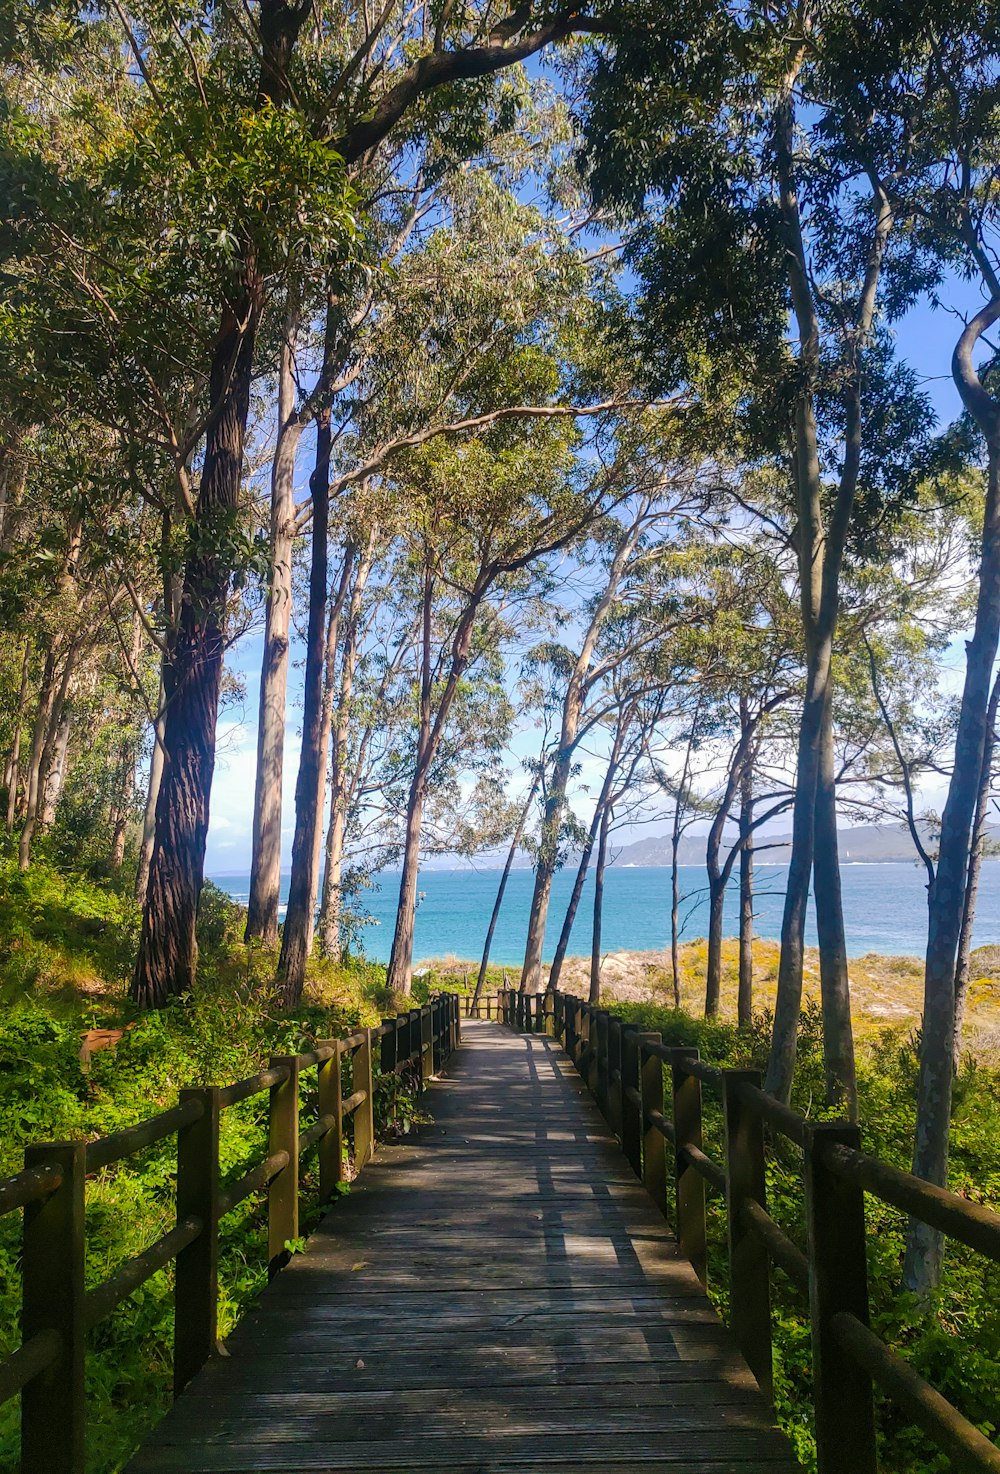 a wooden walkway leading to the beach through the trees